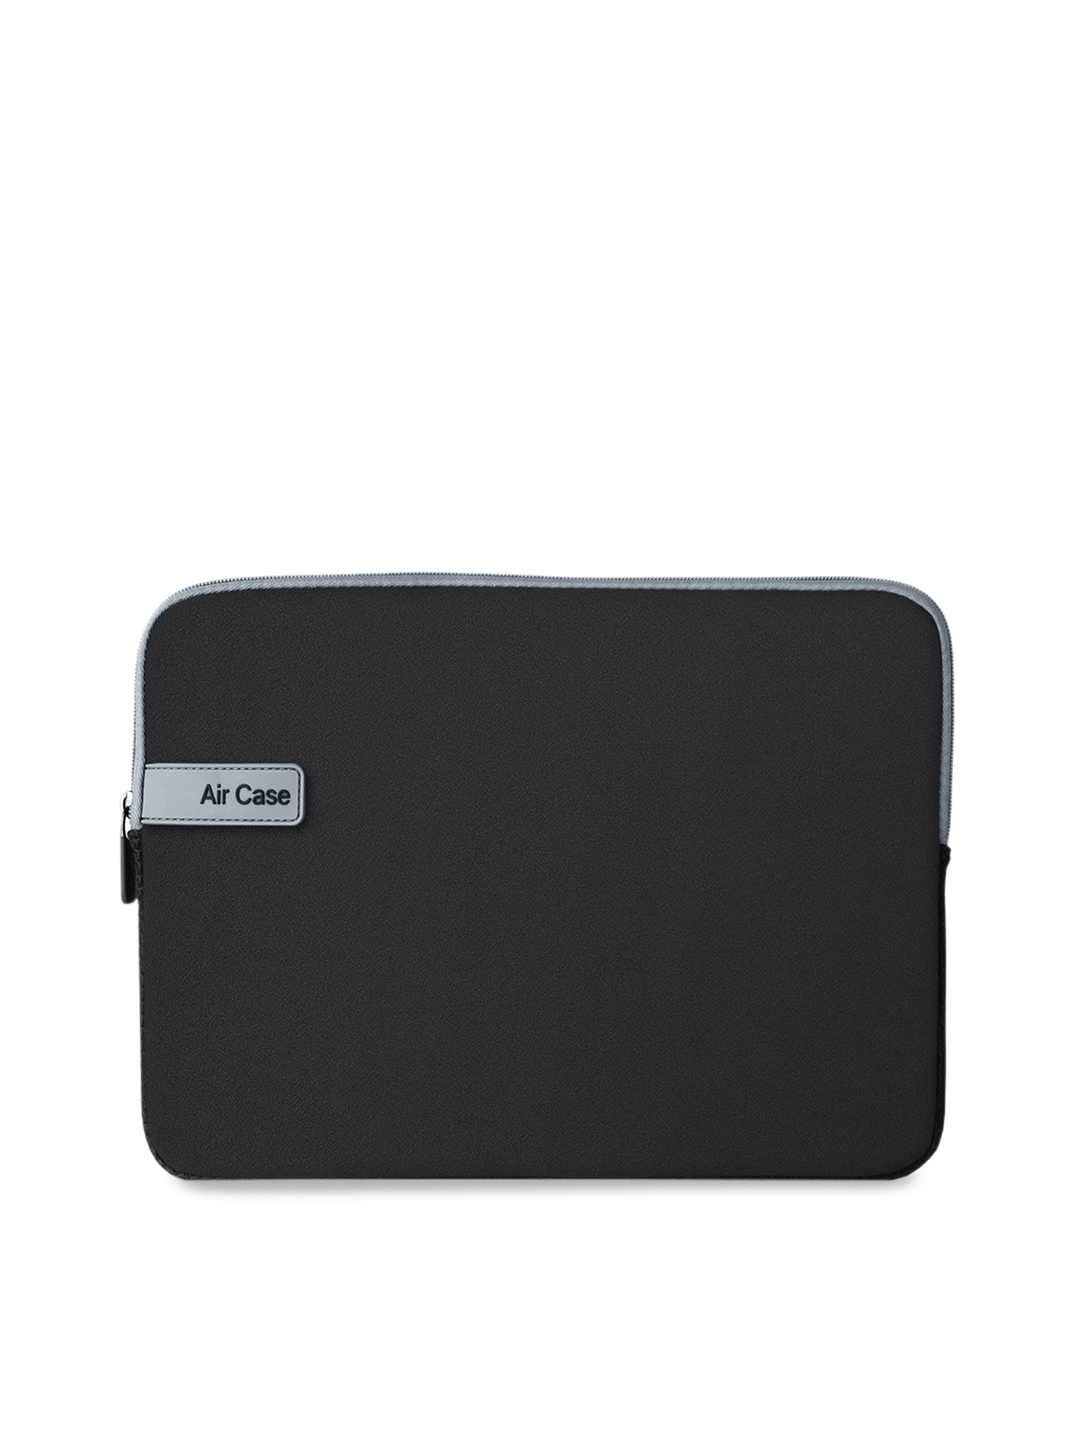 AirCase Unisex Black Solid 13 Inches Laptop Sleeve